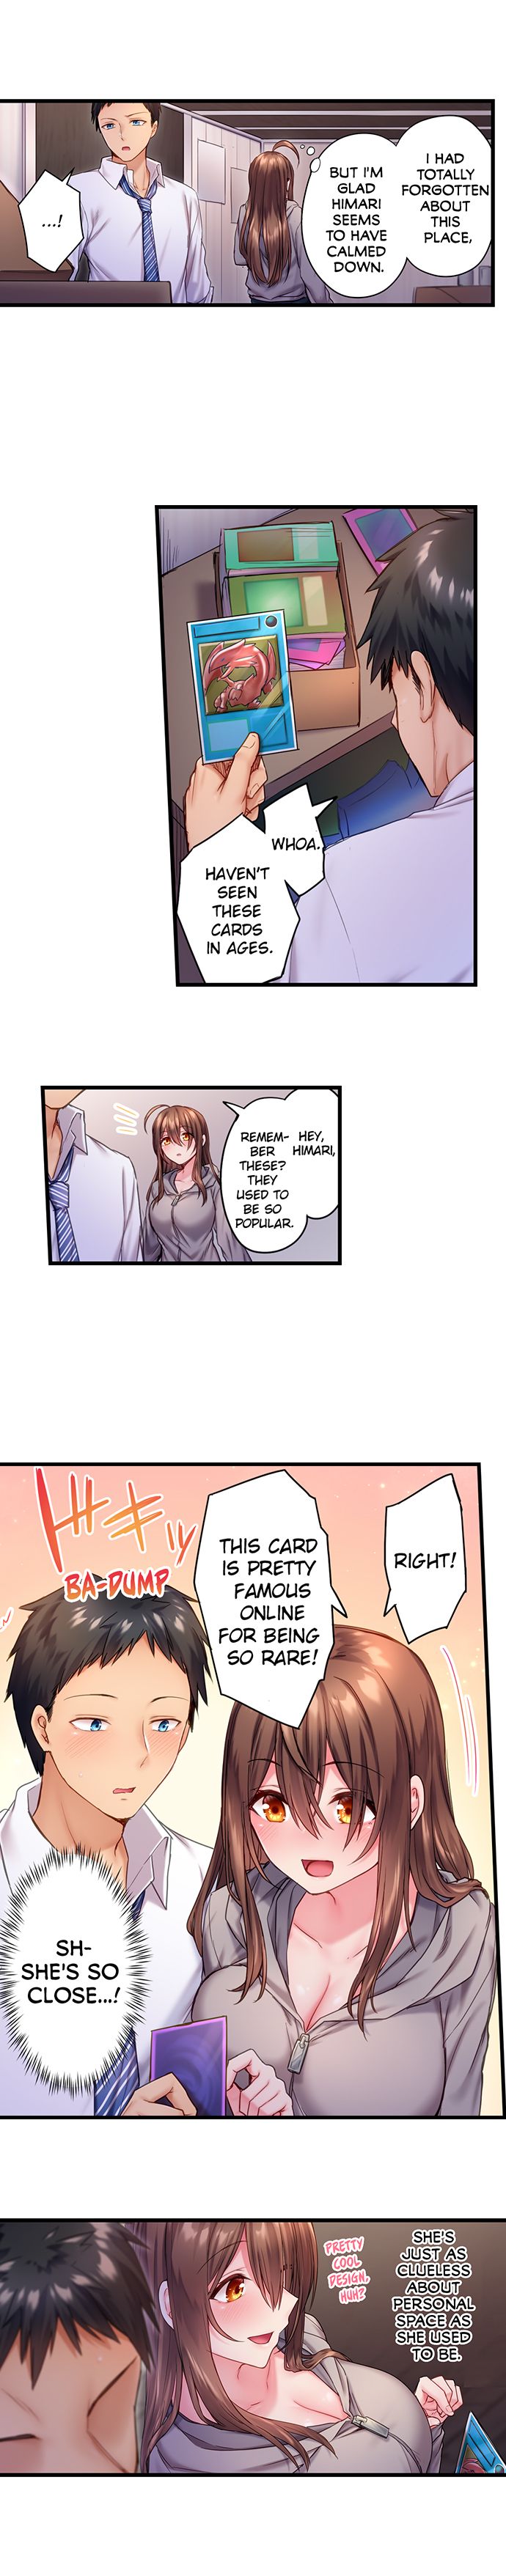 Can’t Believe My Loner Childhood Friend Became This Sexy Girl - Chapter 5 Page 5